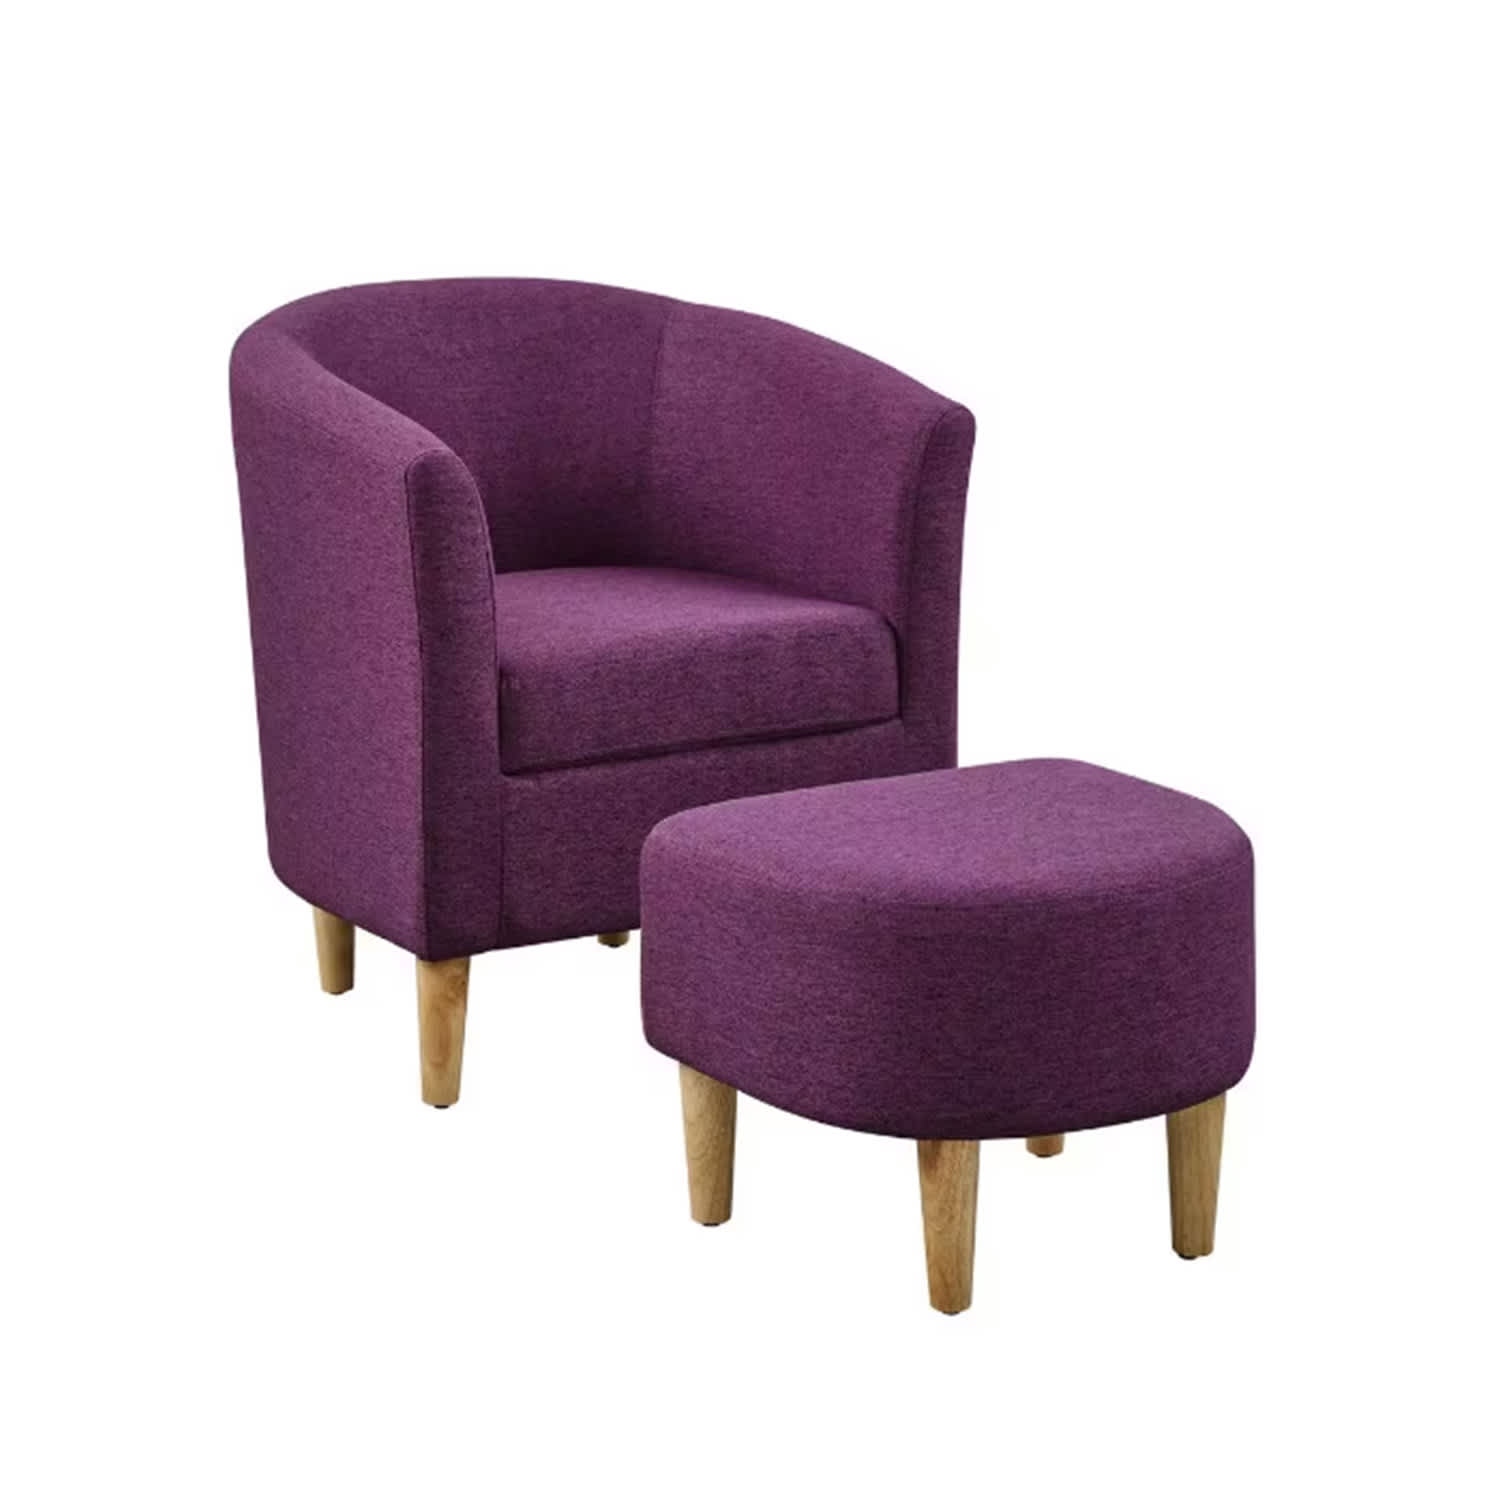 http://cdn.apartmenttherapy.info/image/upload/v1692995559/commerce/product-roundups/2023/2023-08-small-bedroom-chairs/DAZONE-armchair-ottoman.jpg